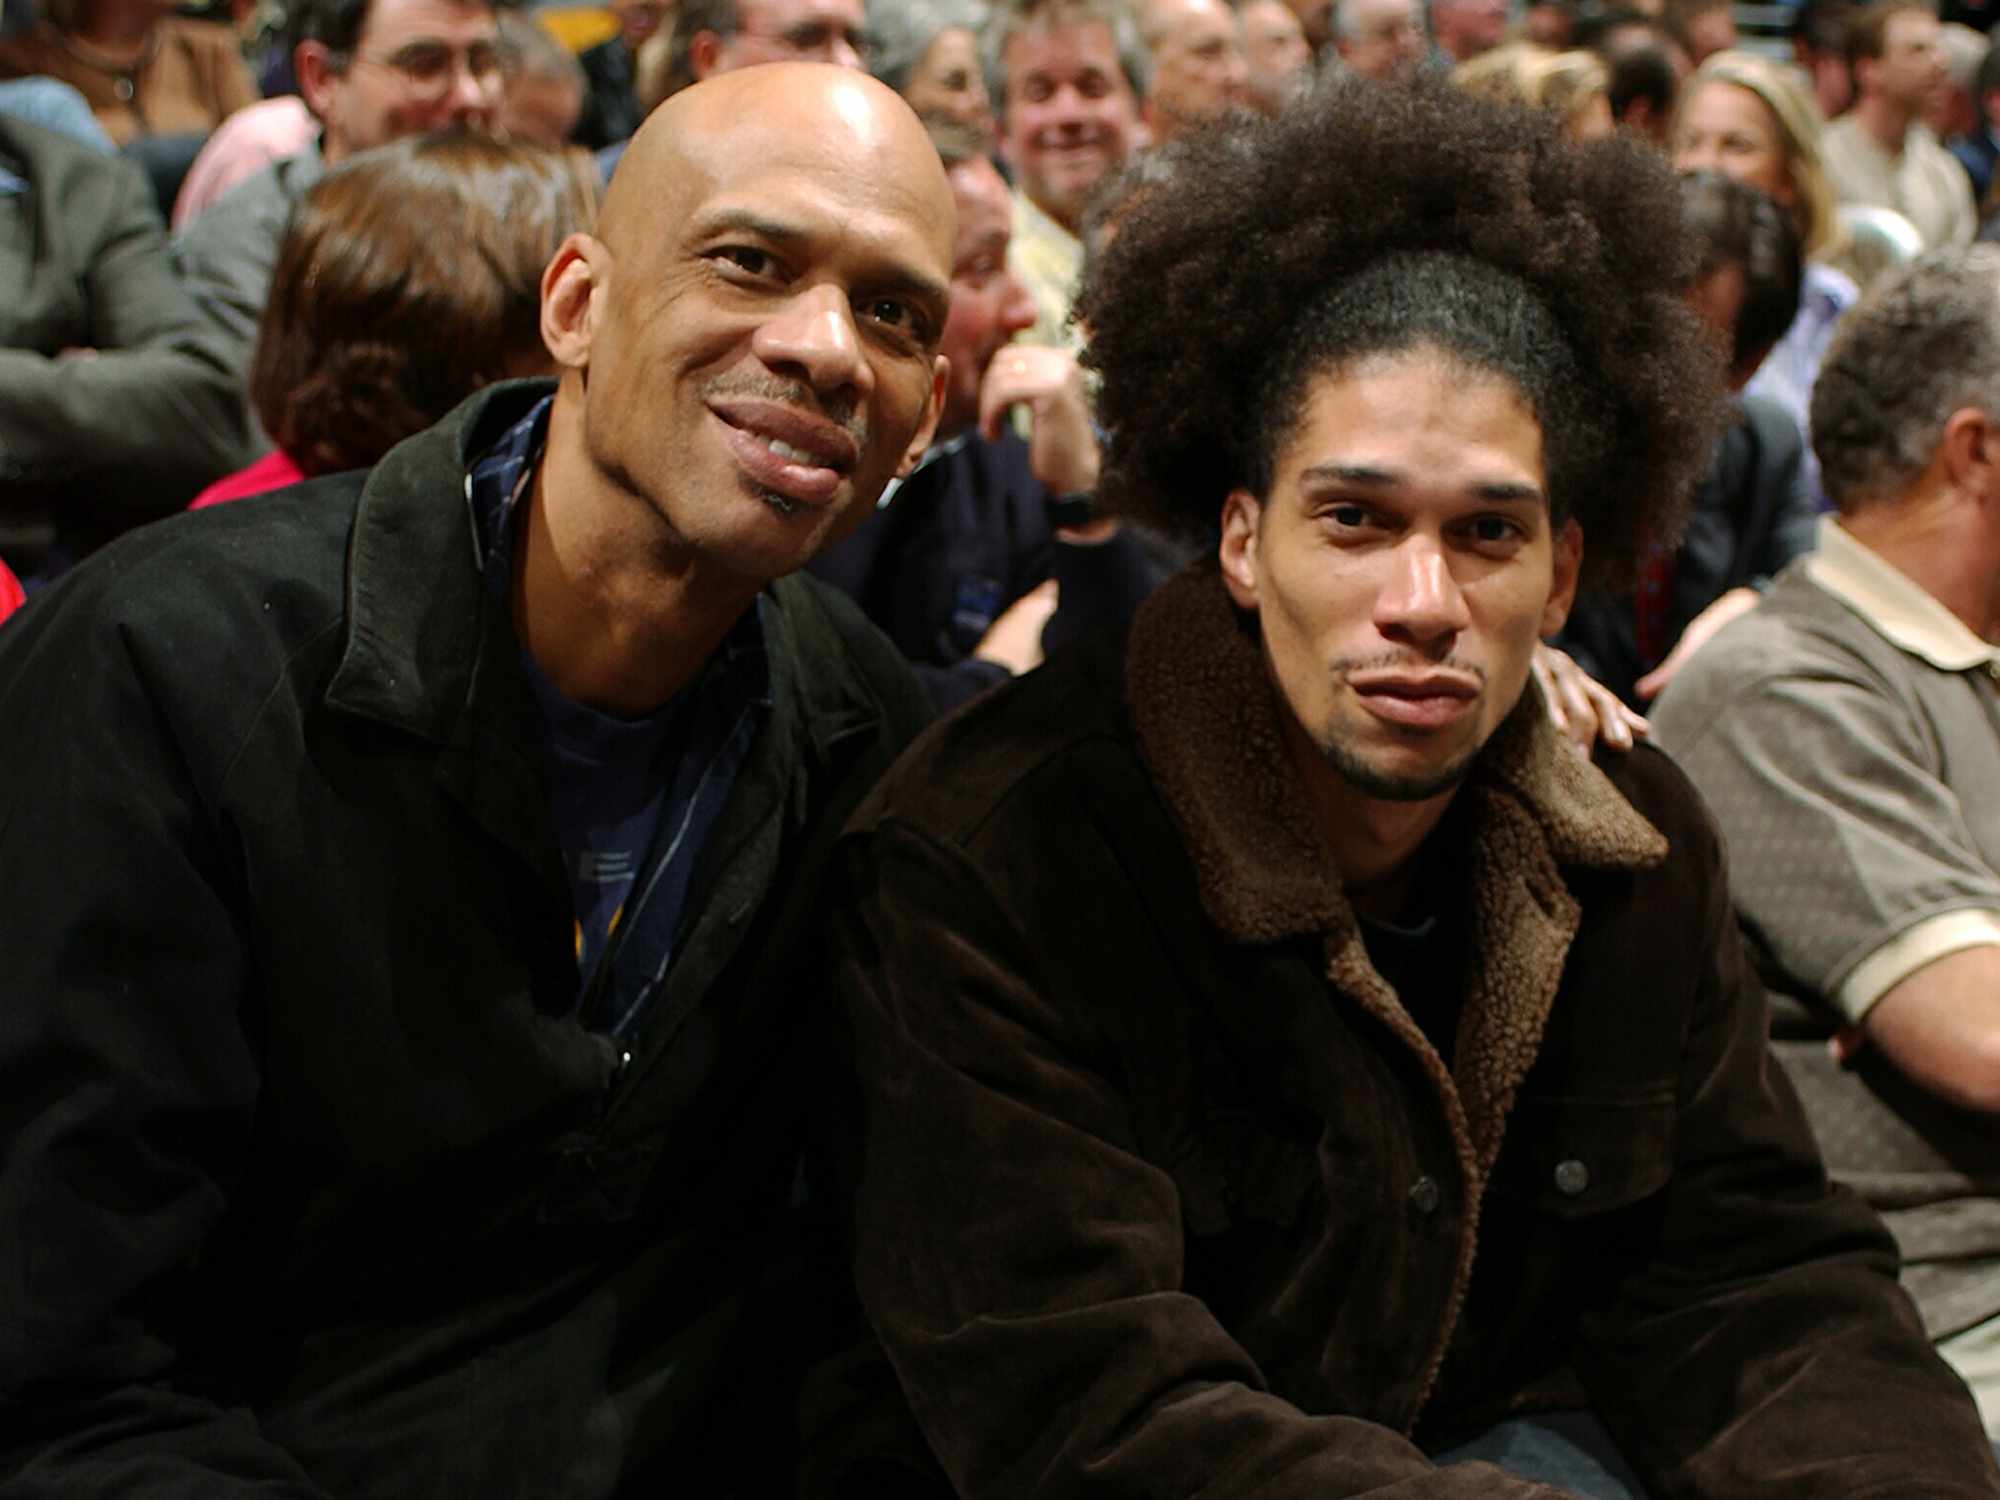 Kareem Abdul-Jabbar and his son attend the Los Angeles Lakers against the New York Knicks